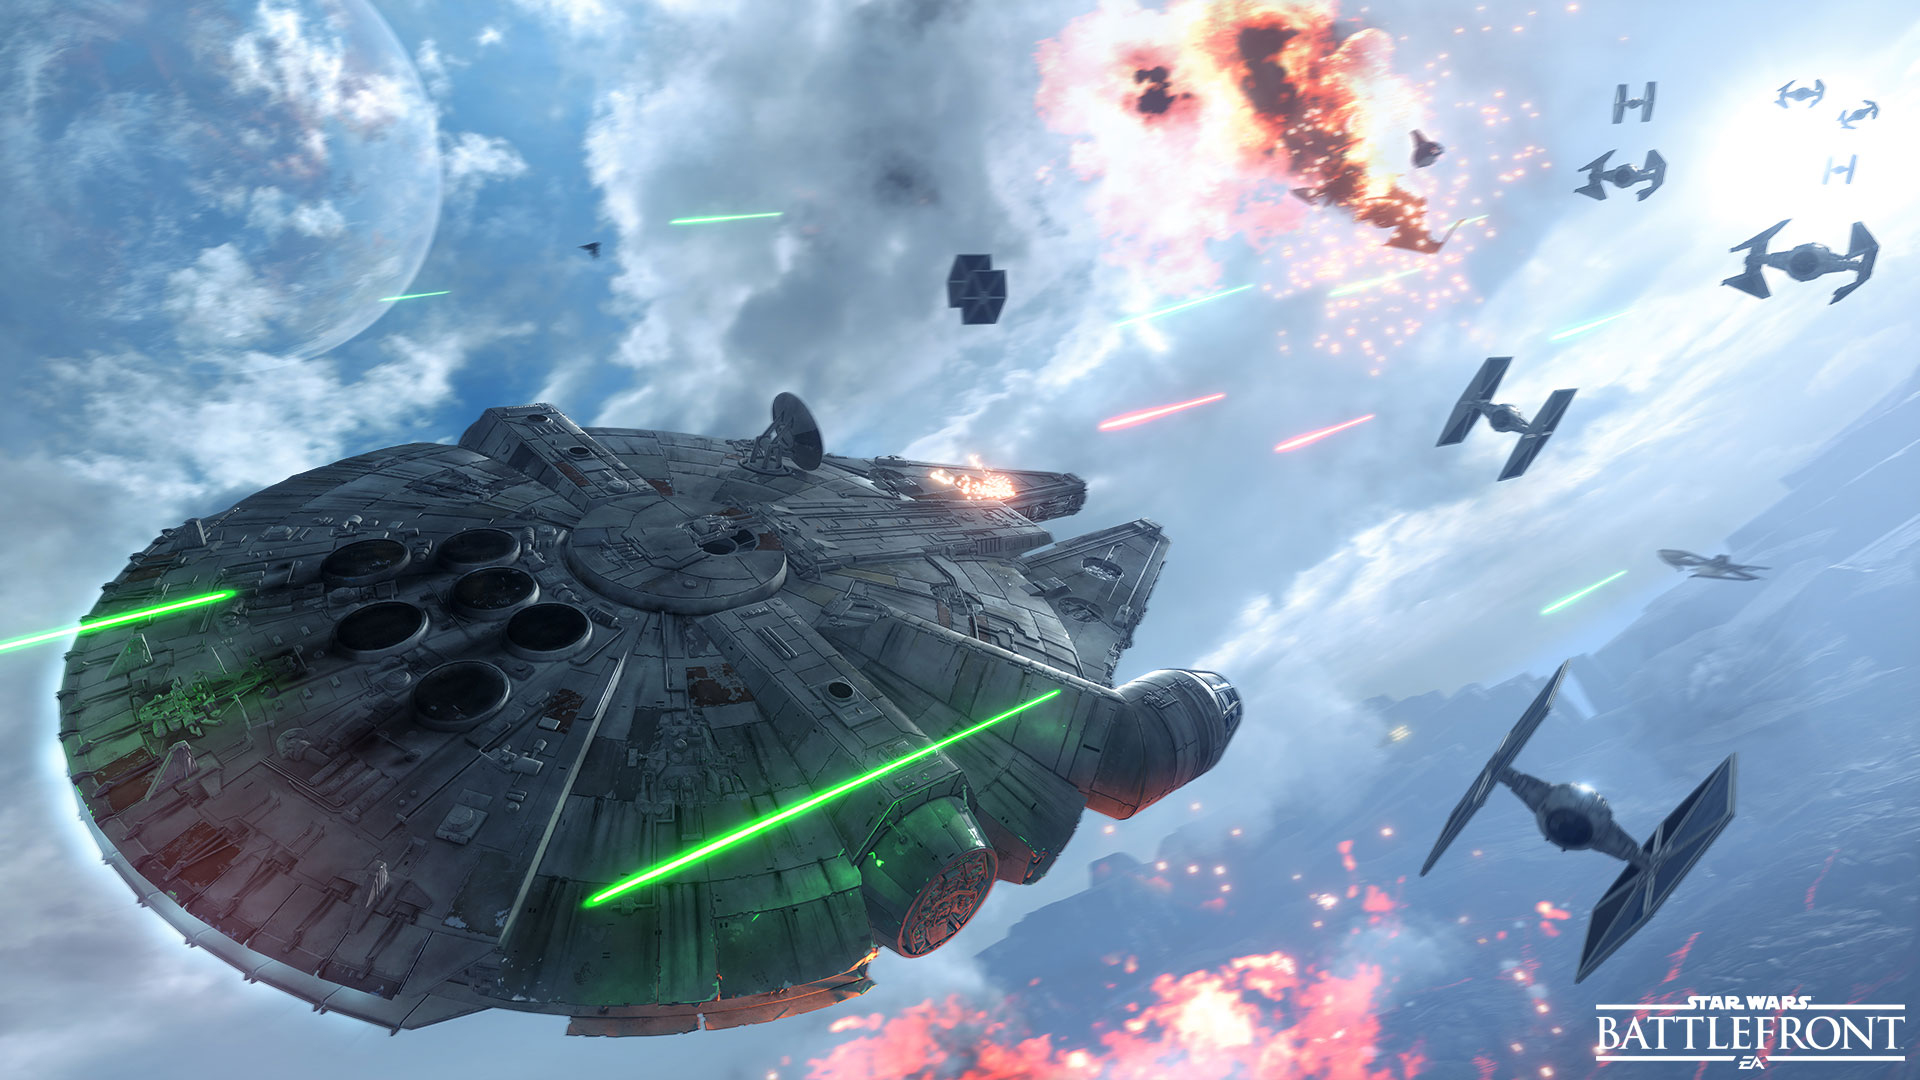 Check Out the Fighter Squadron Gameplay and the Millennium Falcon!